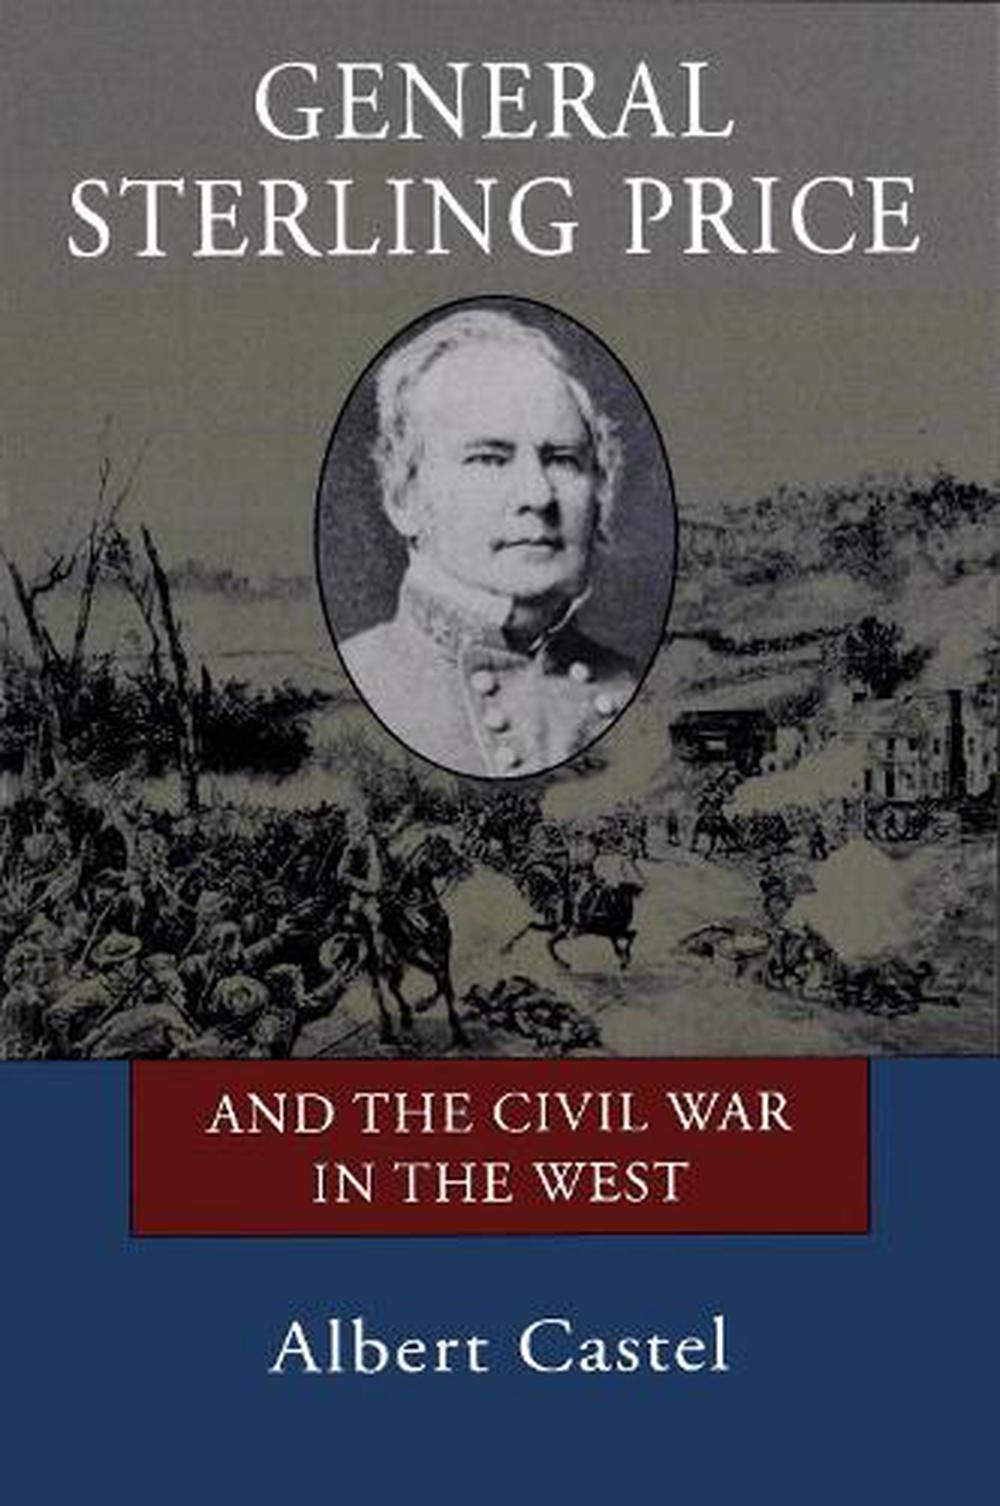 General Sterling Price and the Civil War in the West by Albert E. Castel